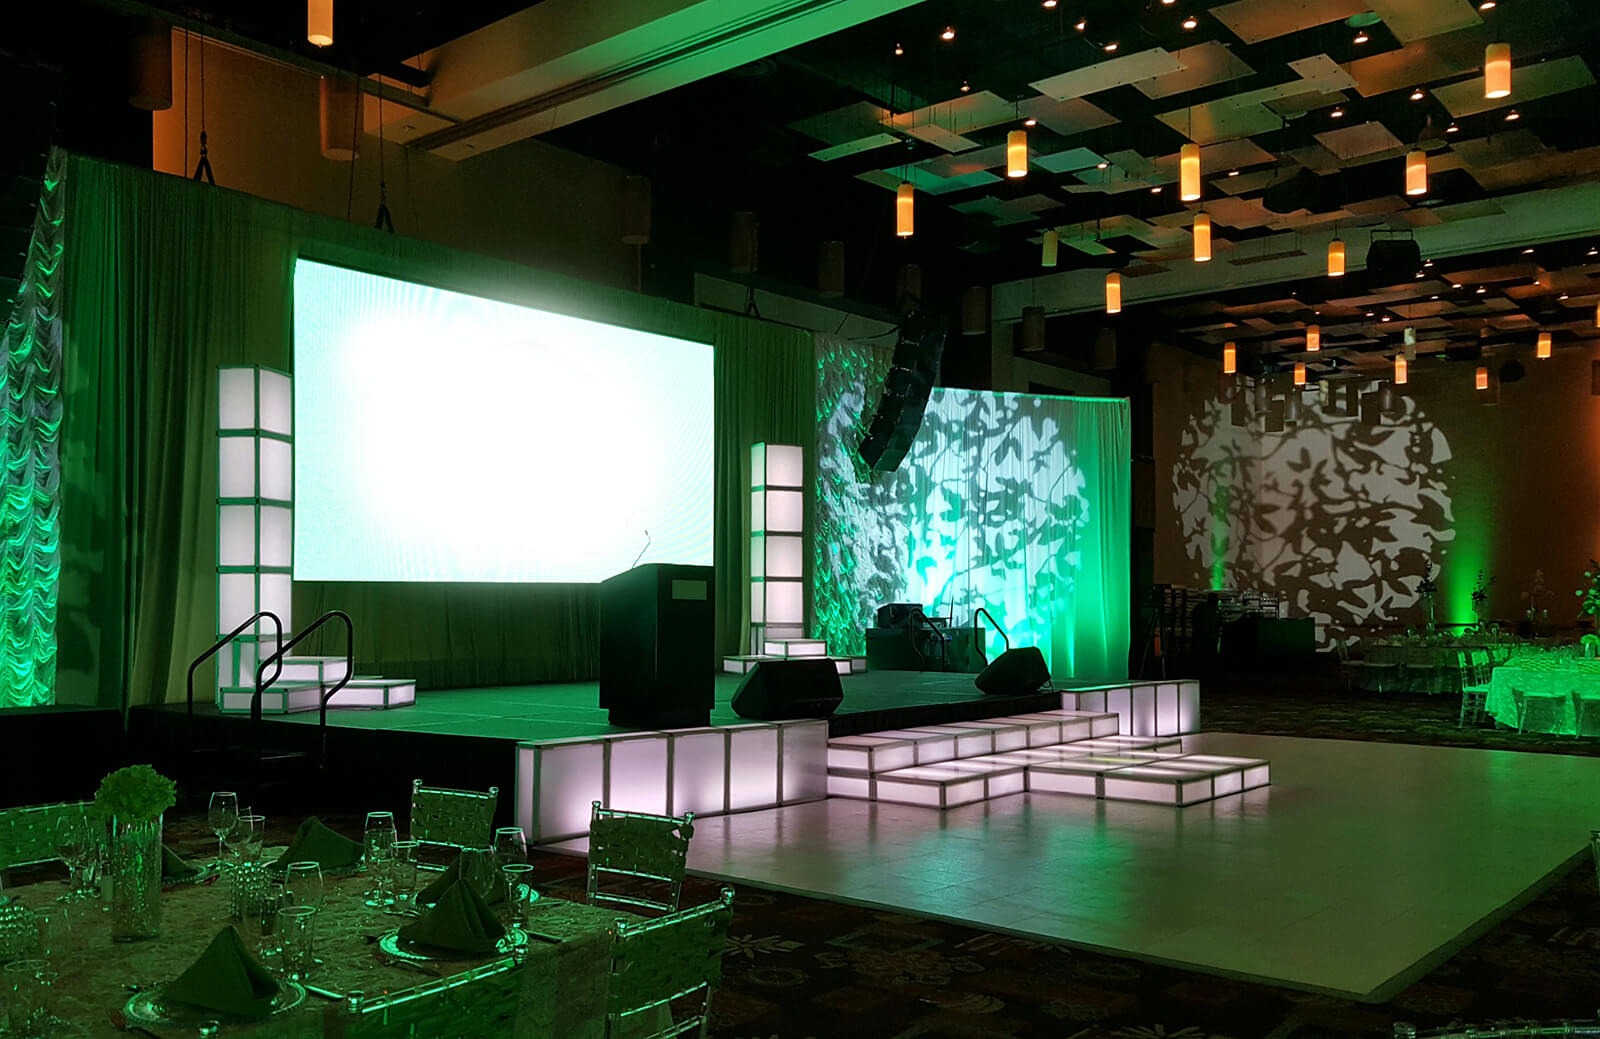 Slate White dance floor in this hotel event space in Trinidad